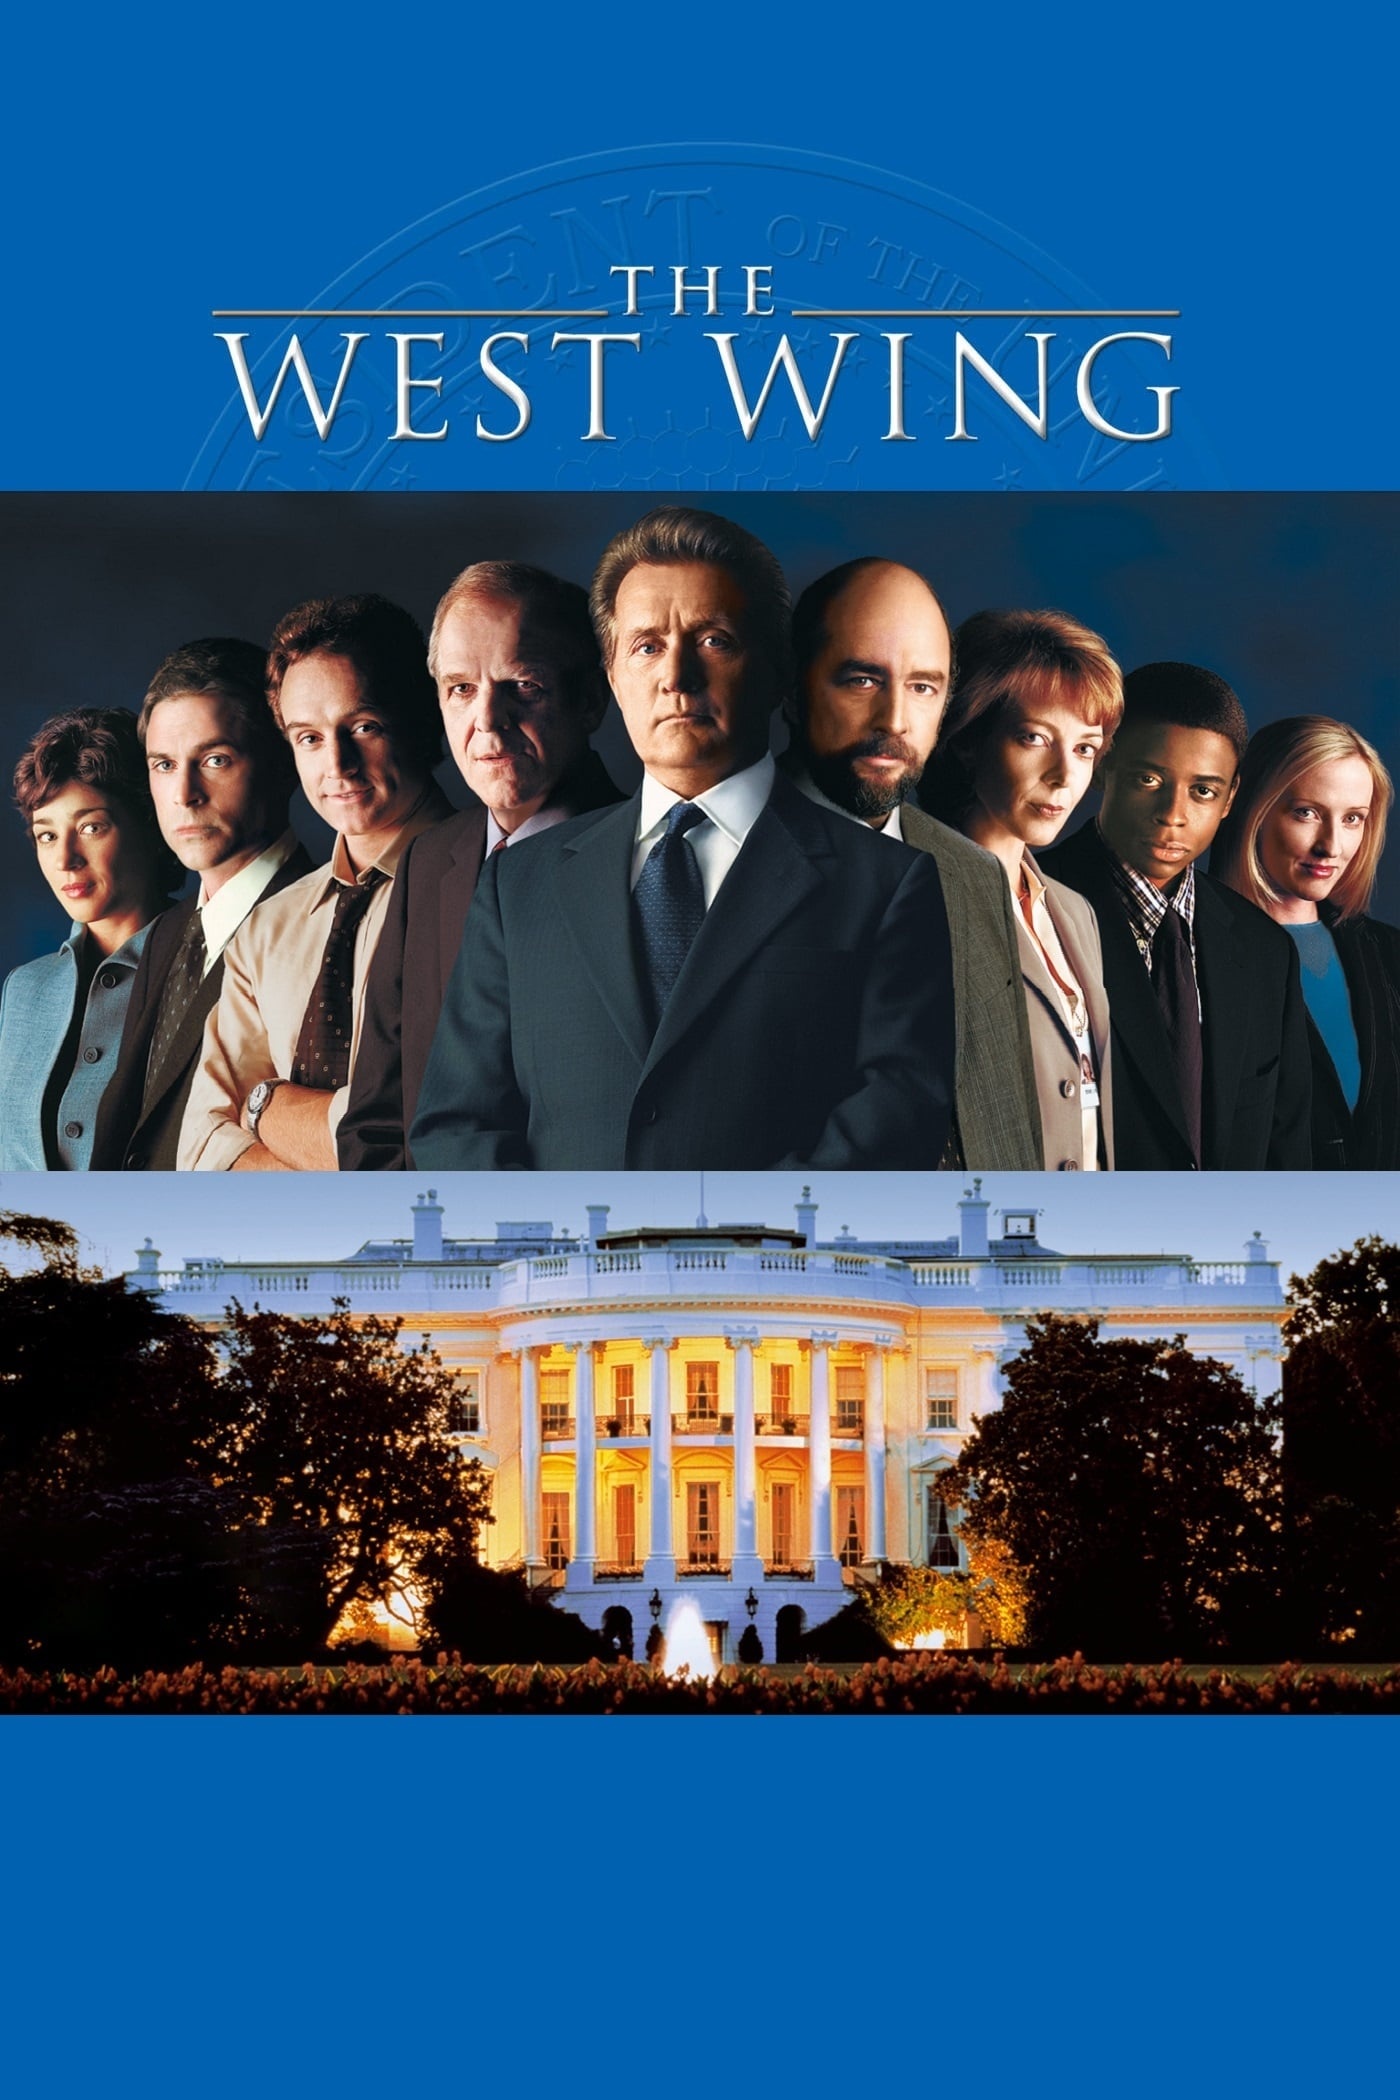 The West Wing (TV Series): The TV show about the daily work of the Executive Branch of the federal government. 1400x2100 HD Background.